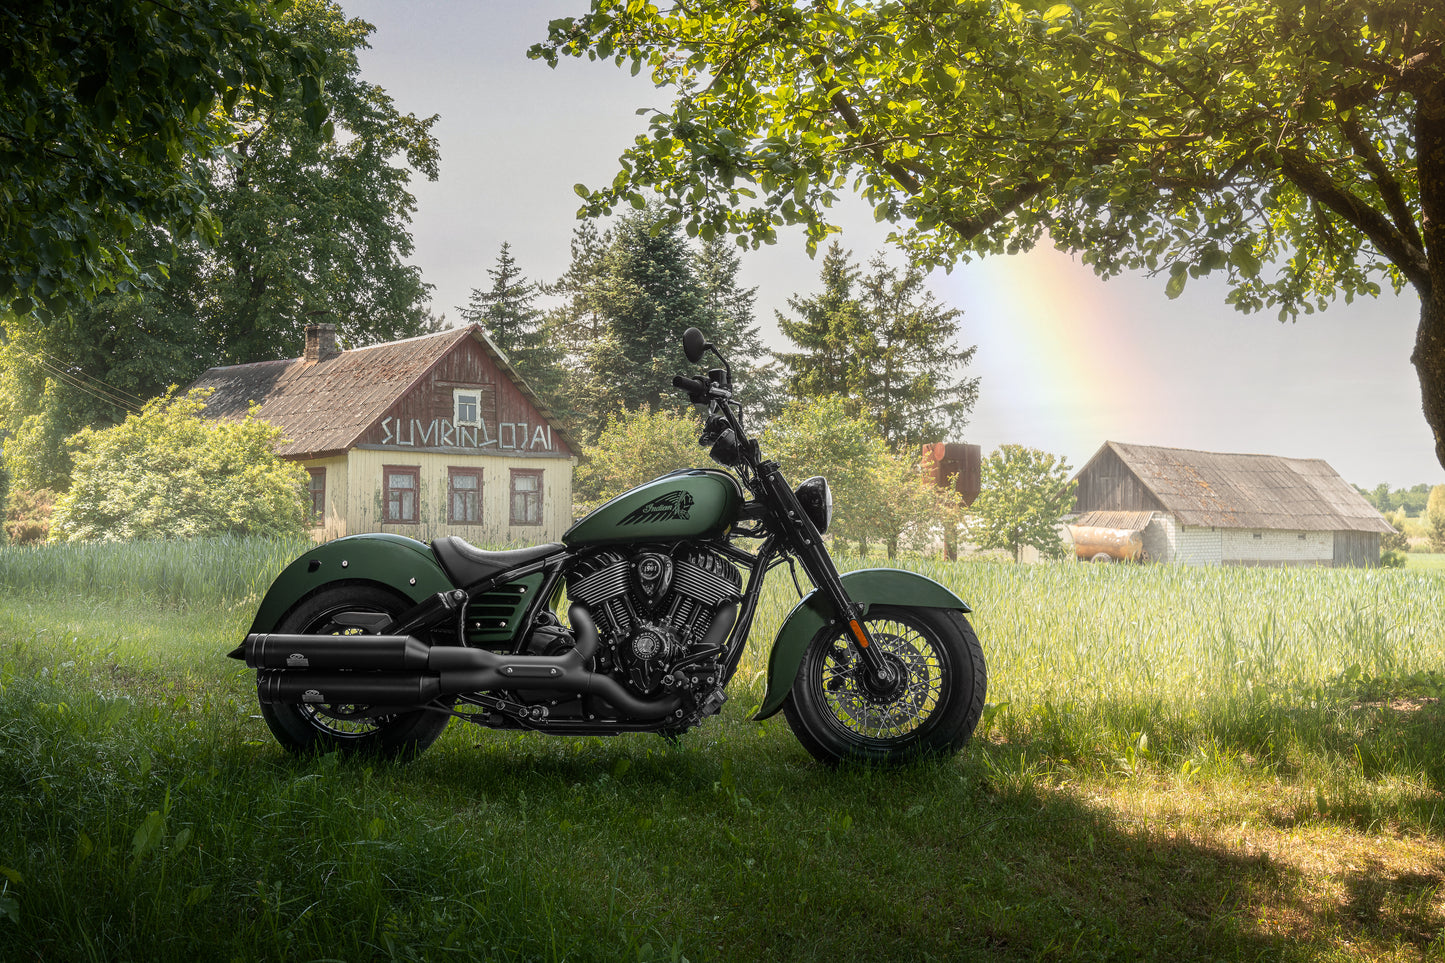 Harley Davidson motorcycle with Killer Custom bobber fork caps on a countryside with a few houses and some trees in the background